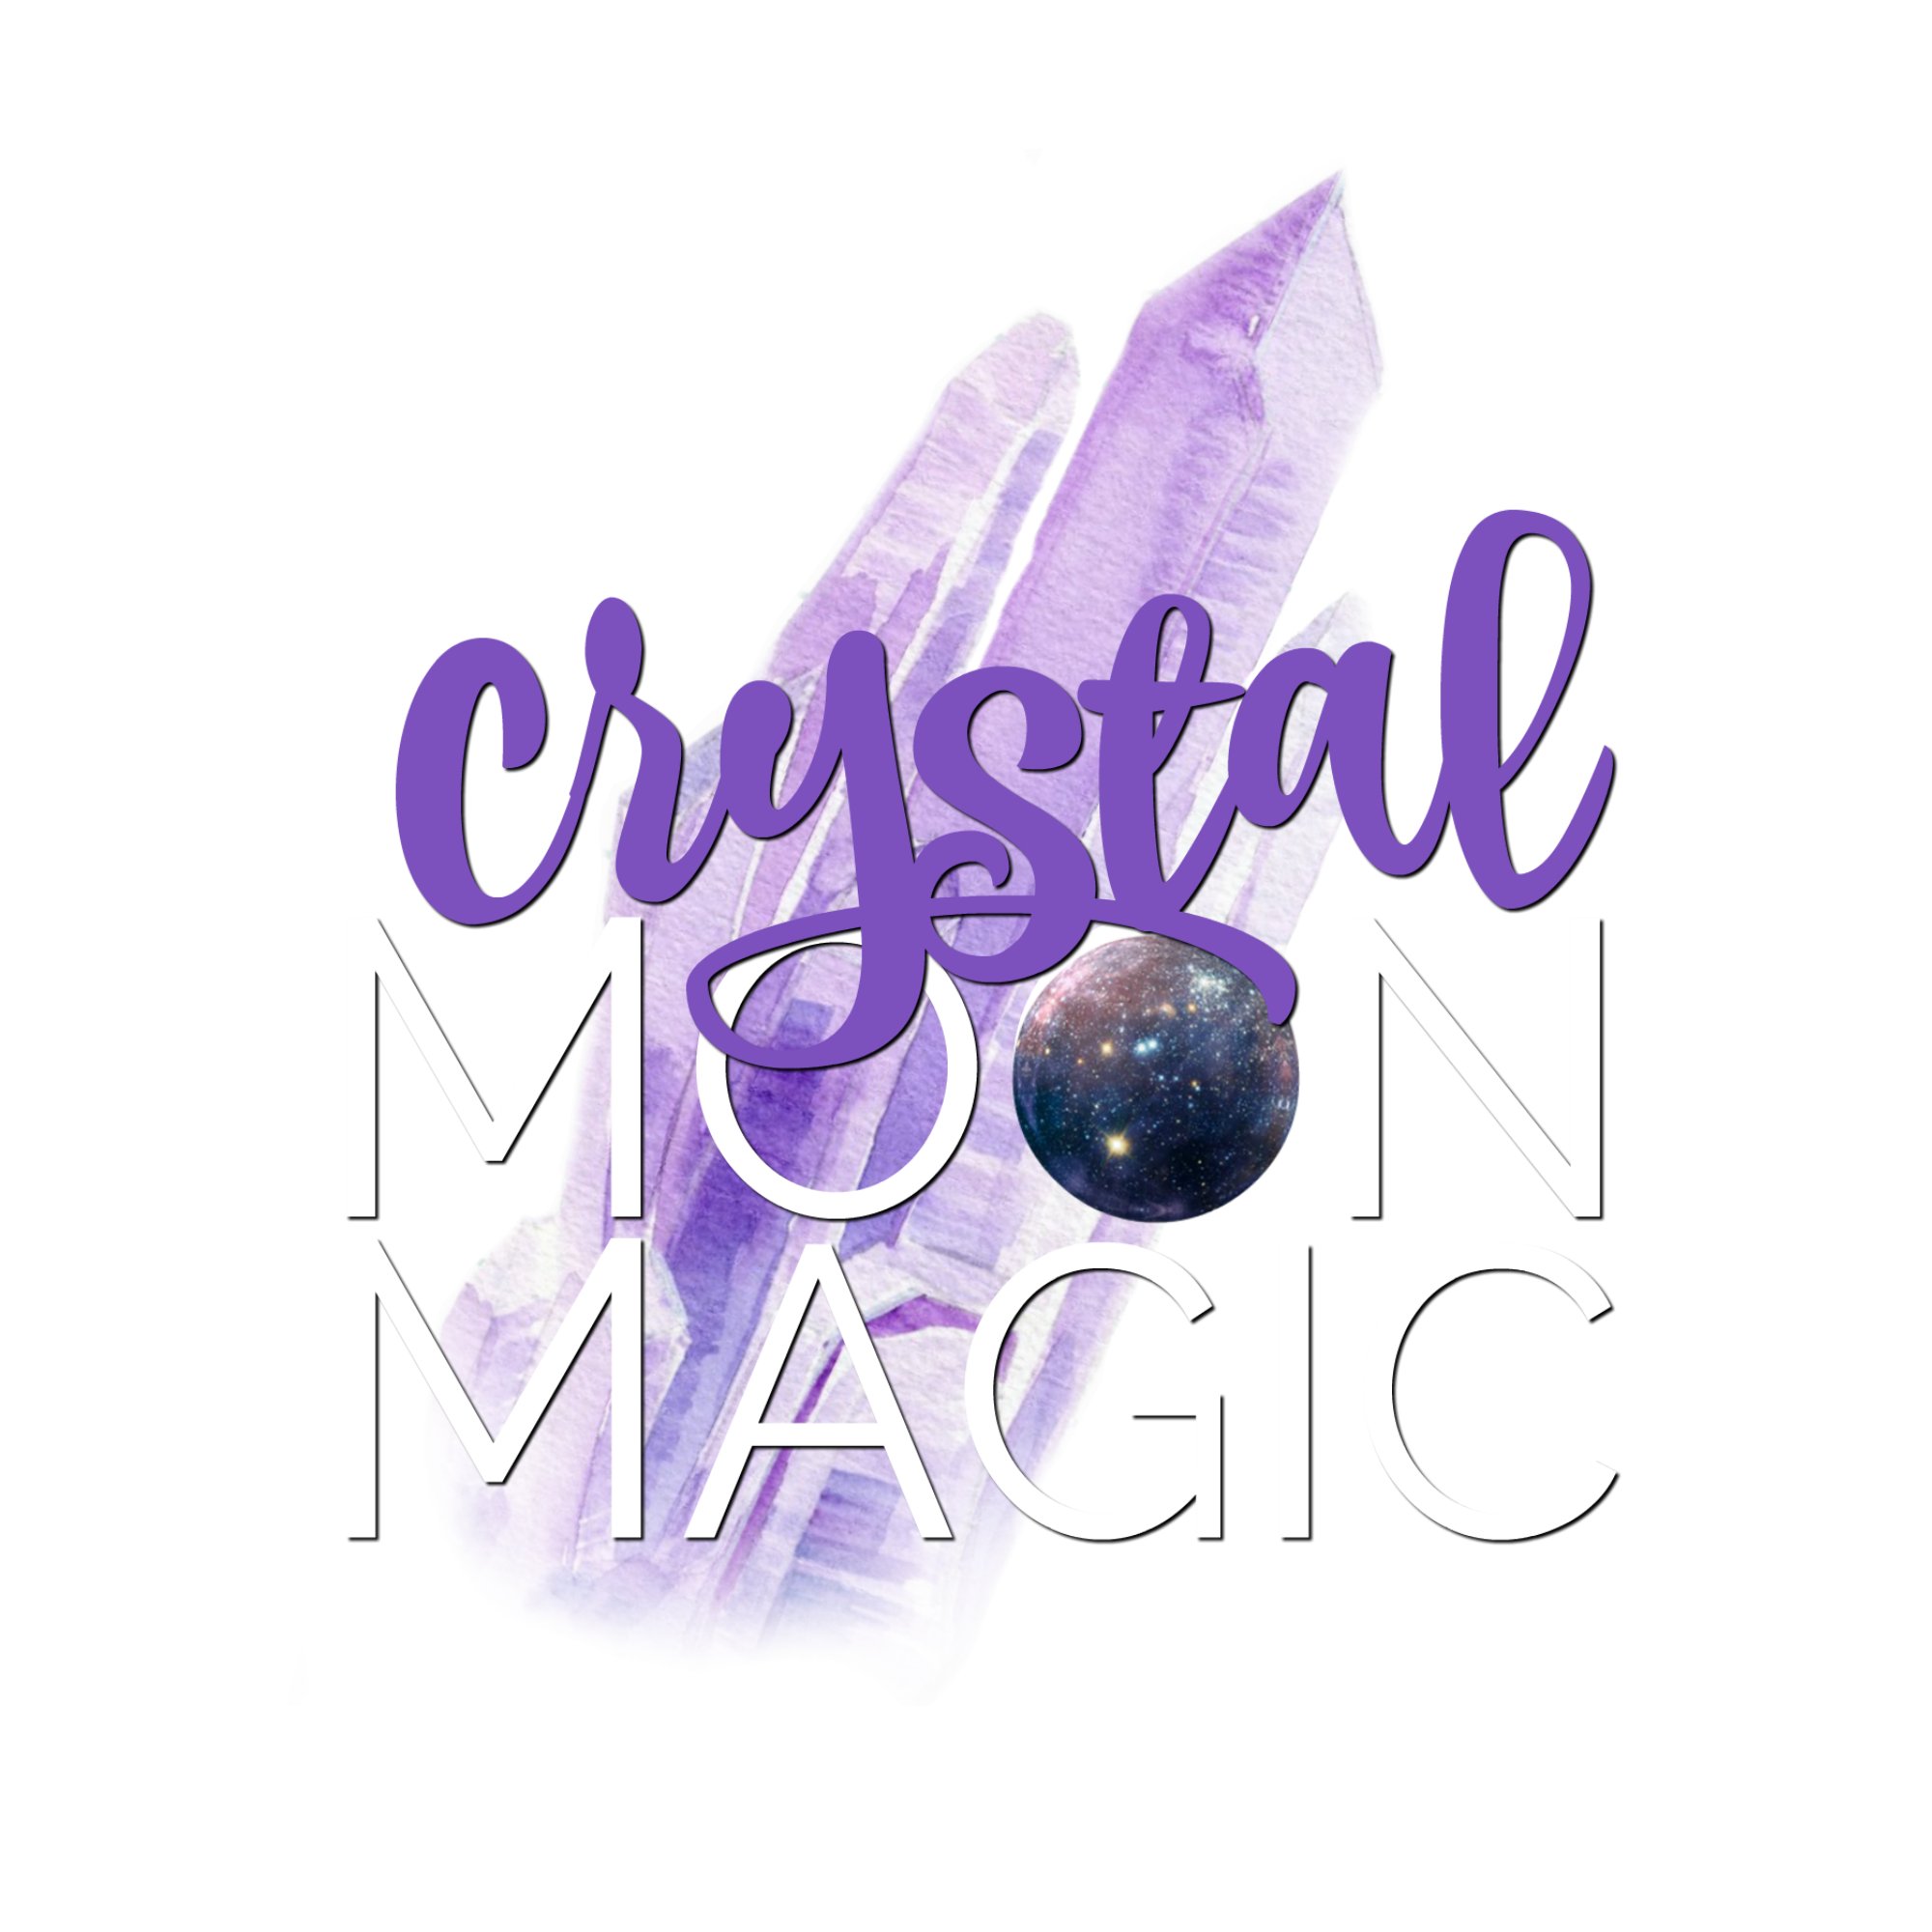 #Blogger, #Vlogger + #Crystal #Jewelry #Artisan. Let's talk all things crystals and build a life you #LOVE!